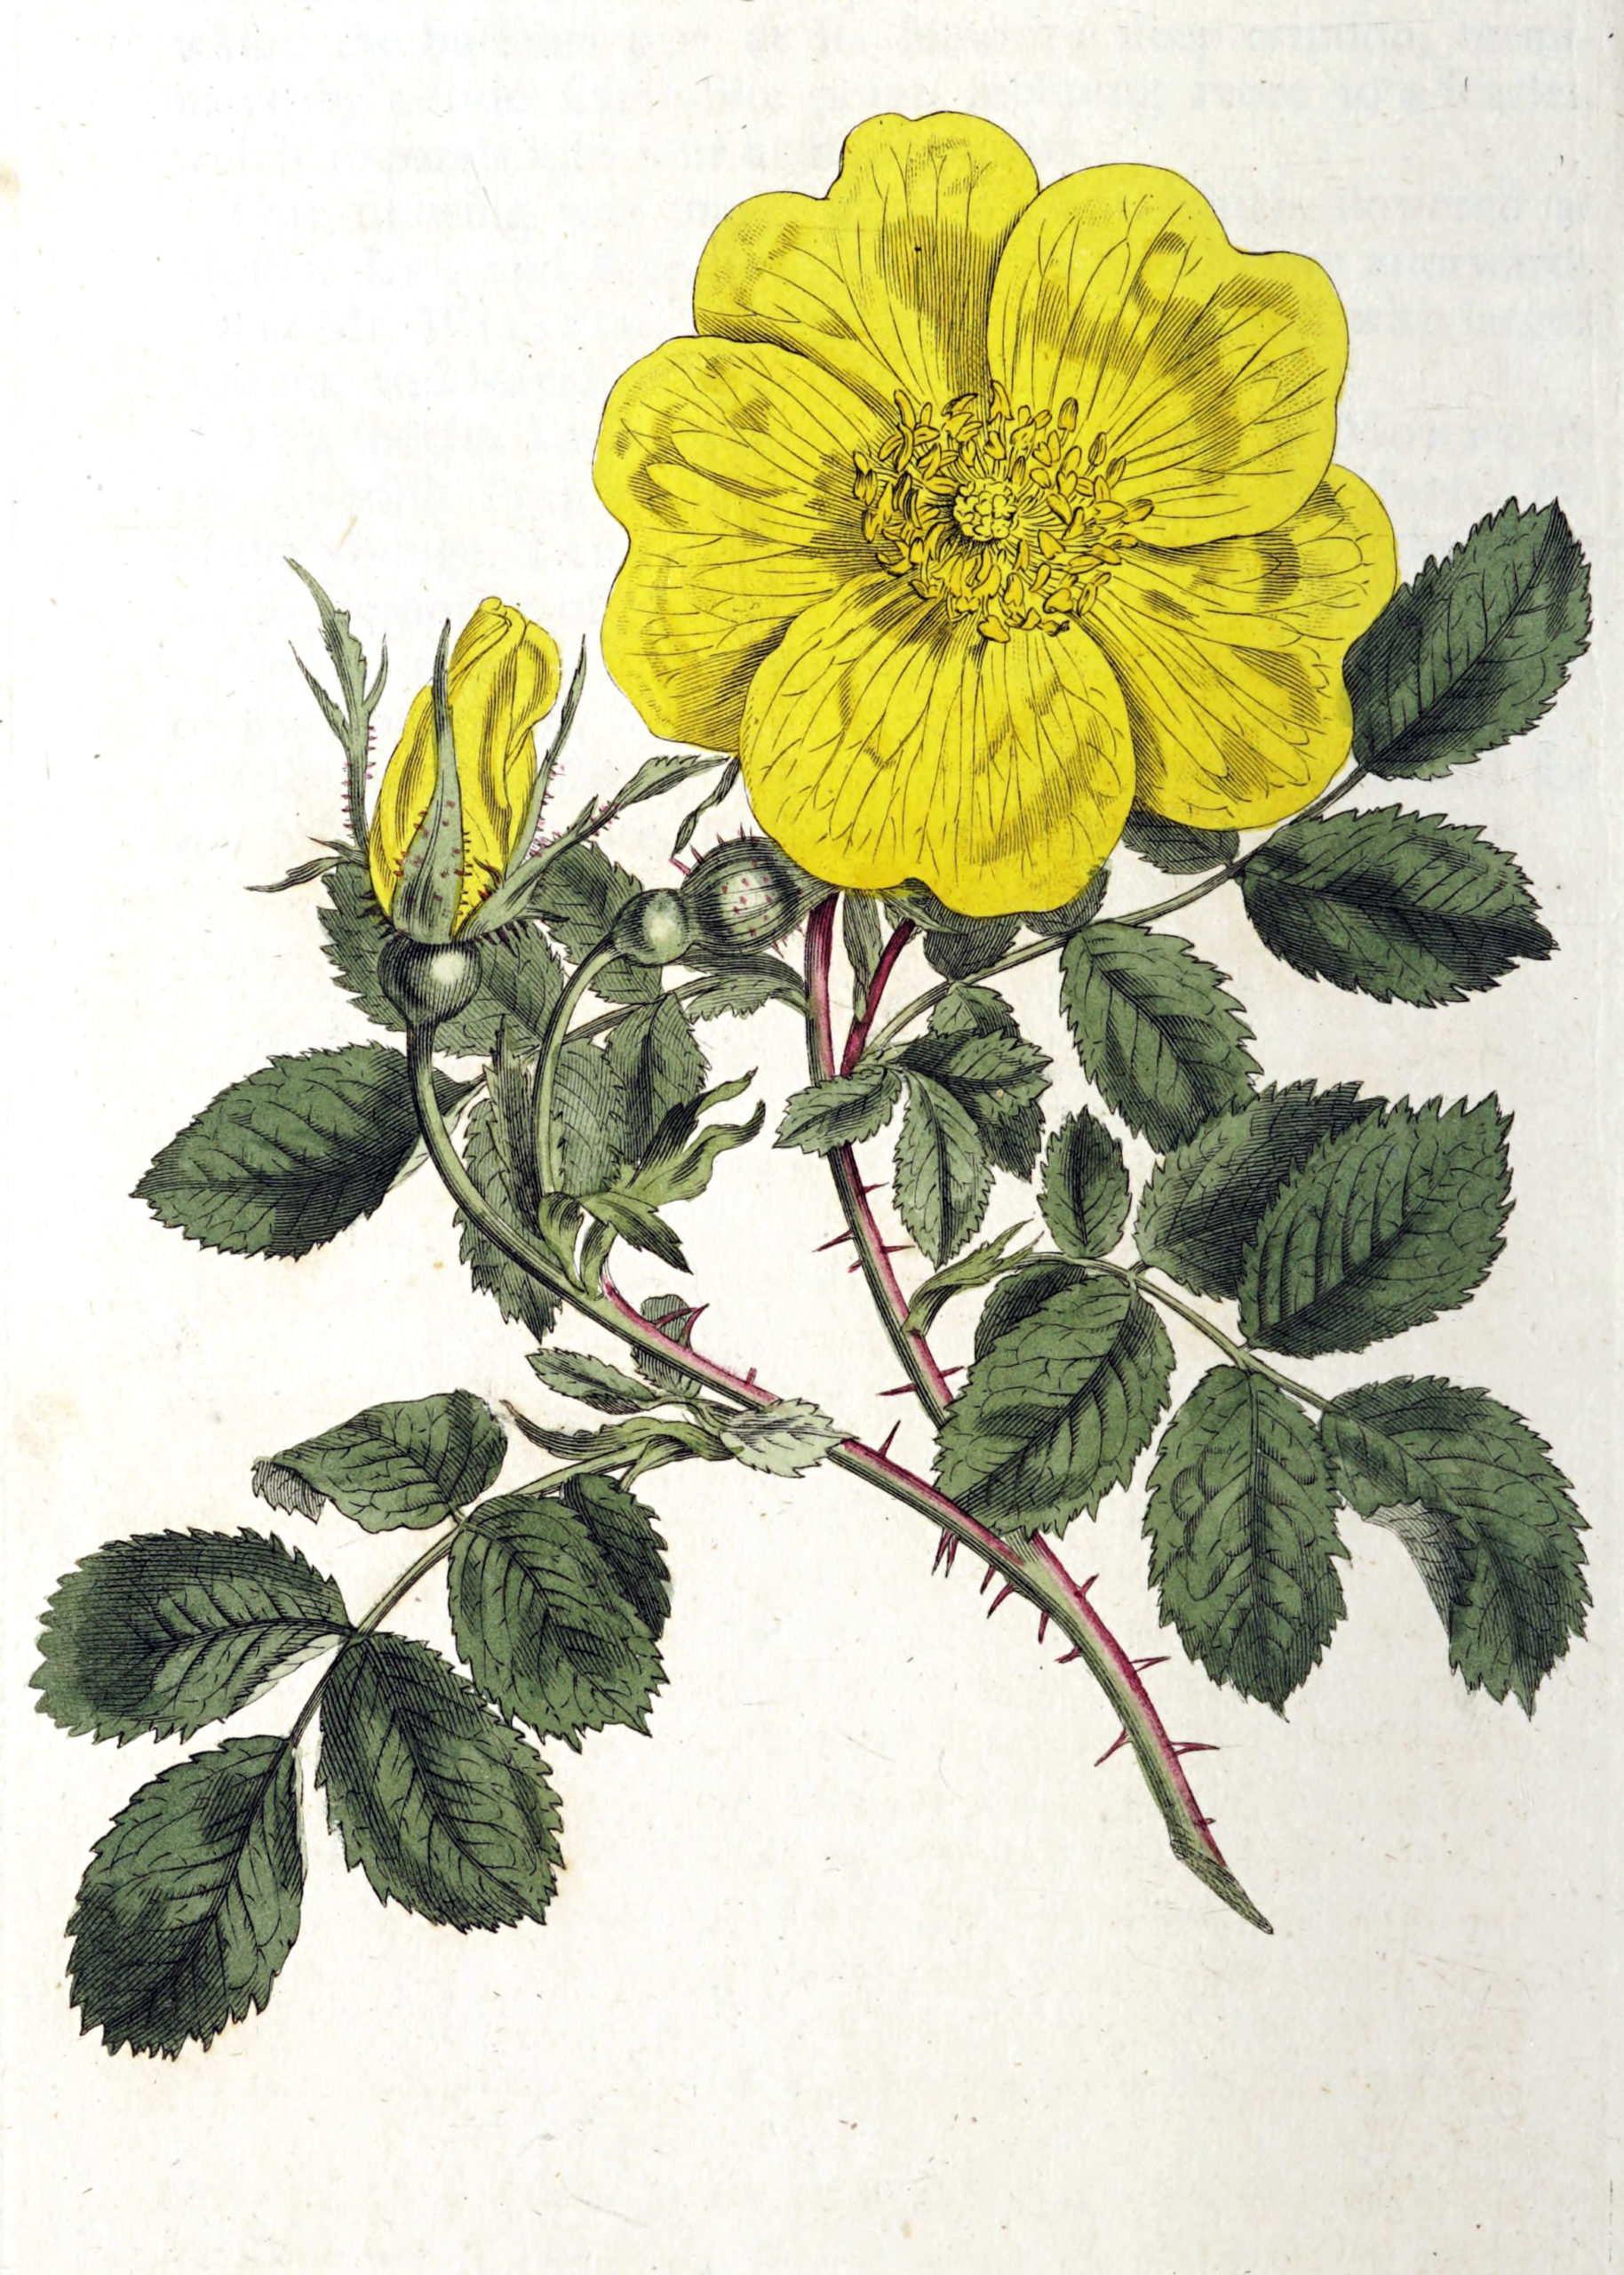 Vintage Botanical Prints - 39 in a series - Rosa lutea (Austrian Rose) from The Botanical Magazine ( 1807)